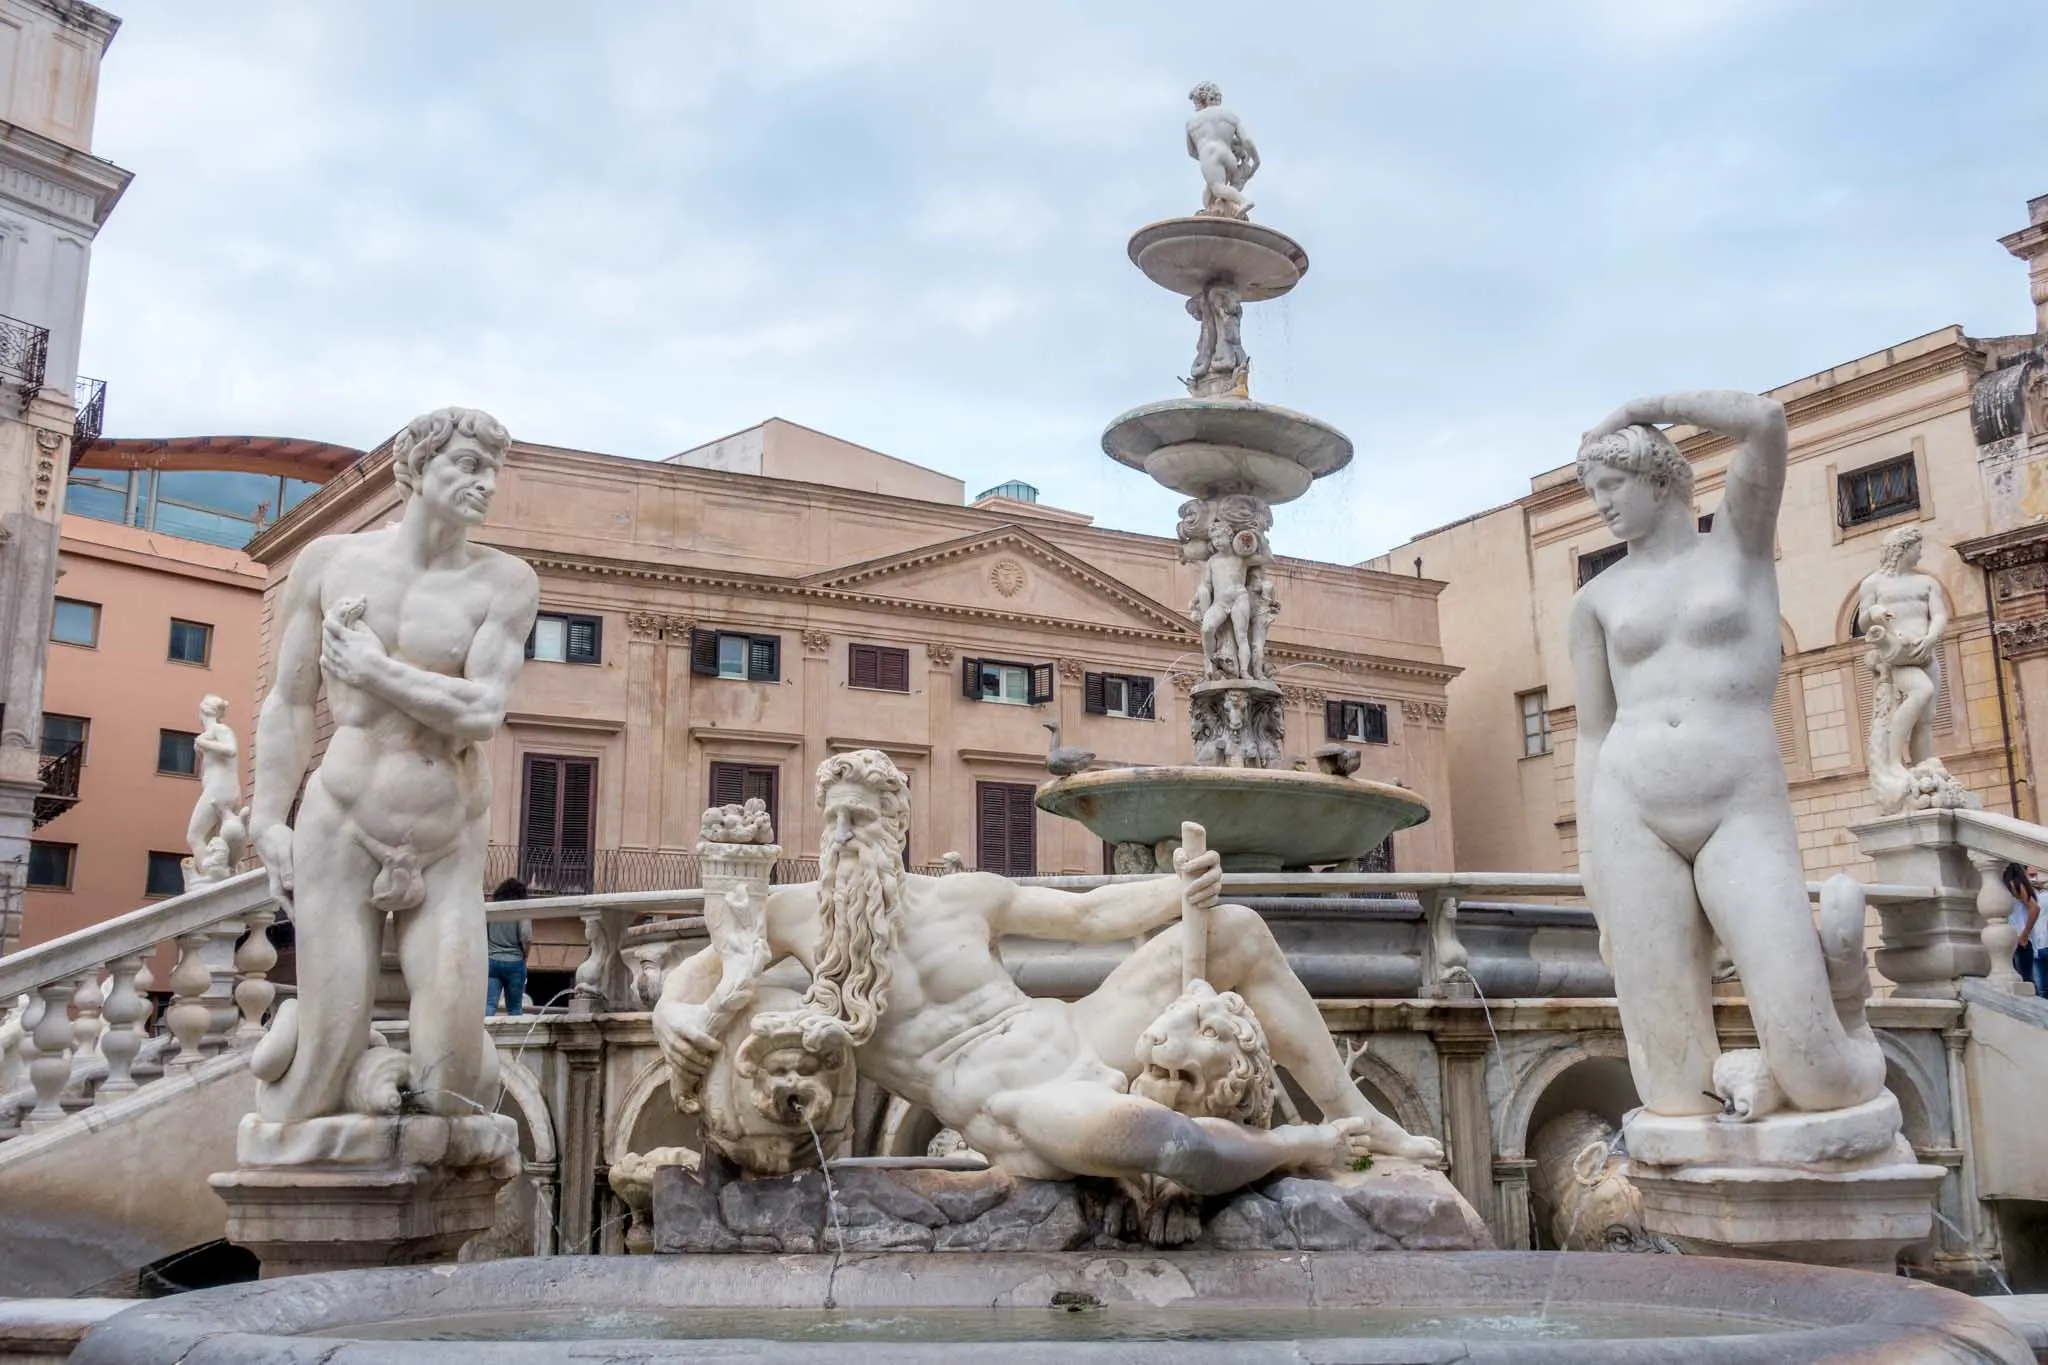 Nude human figures made of marble decorating  a fountain